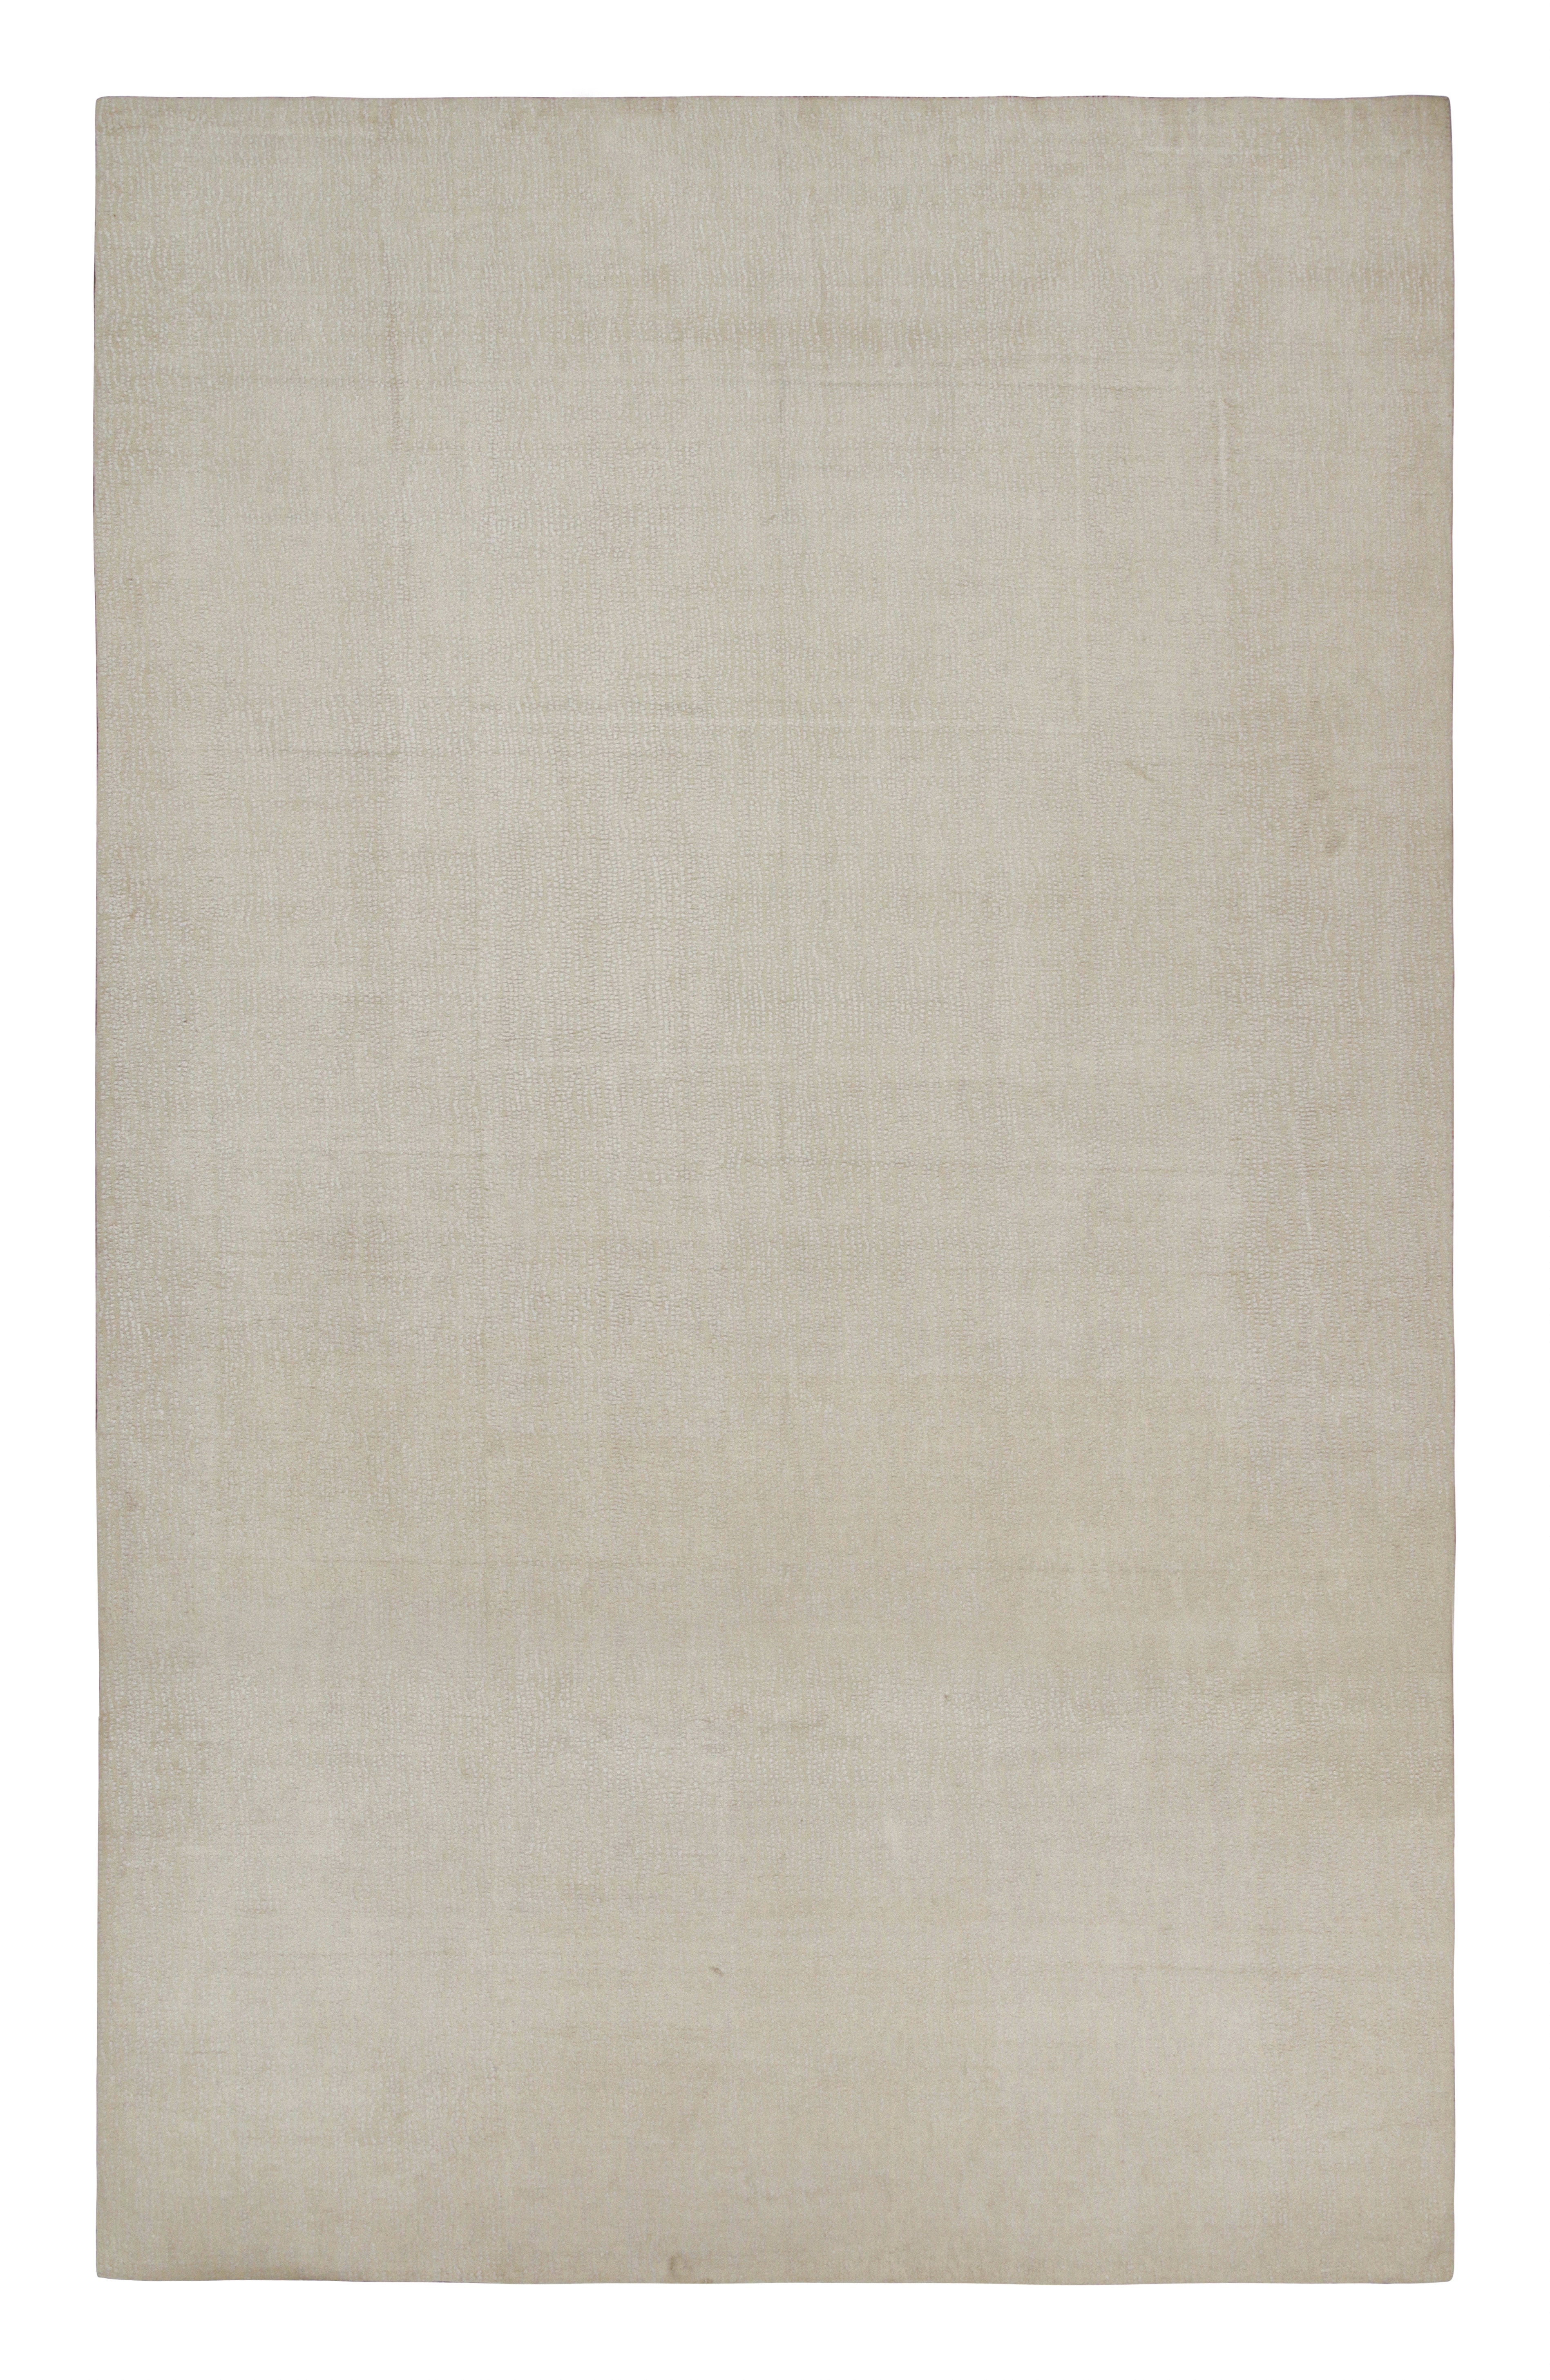 Indian Rug & Kilim’s Modern High-and-Low Textural Rug Design in Off White For Sale